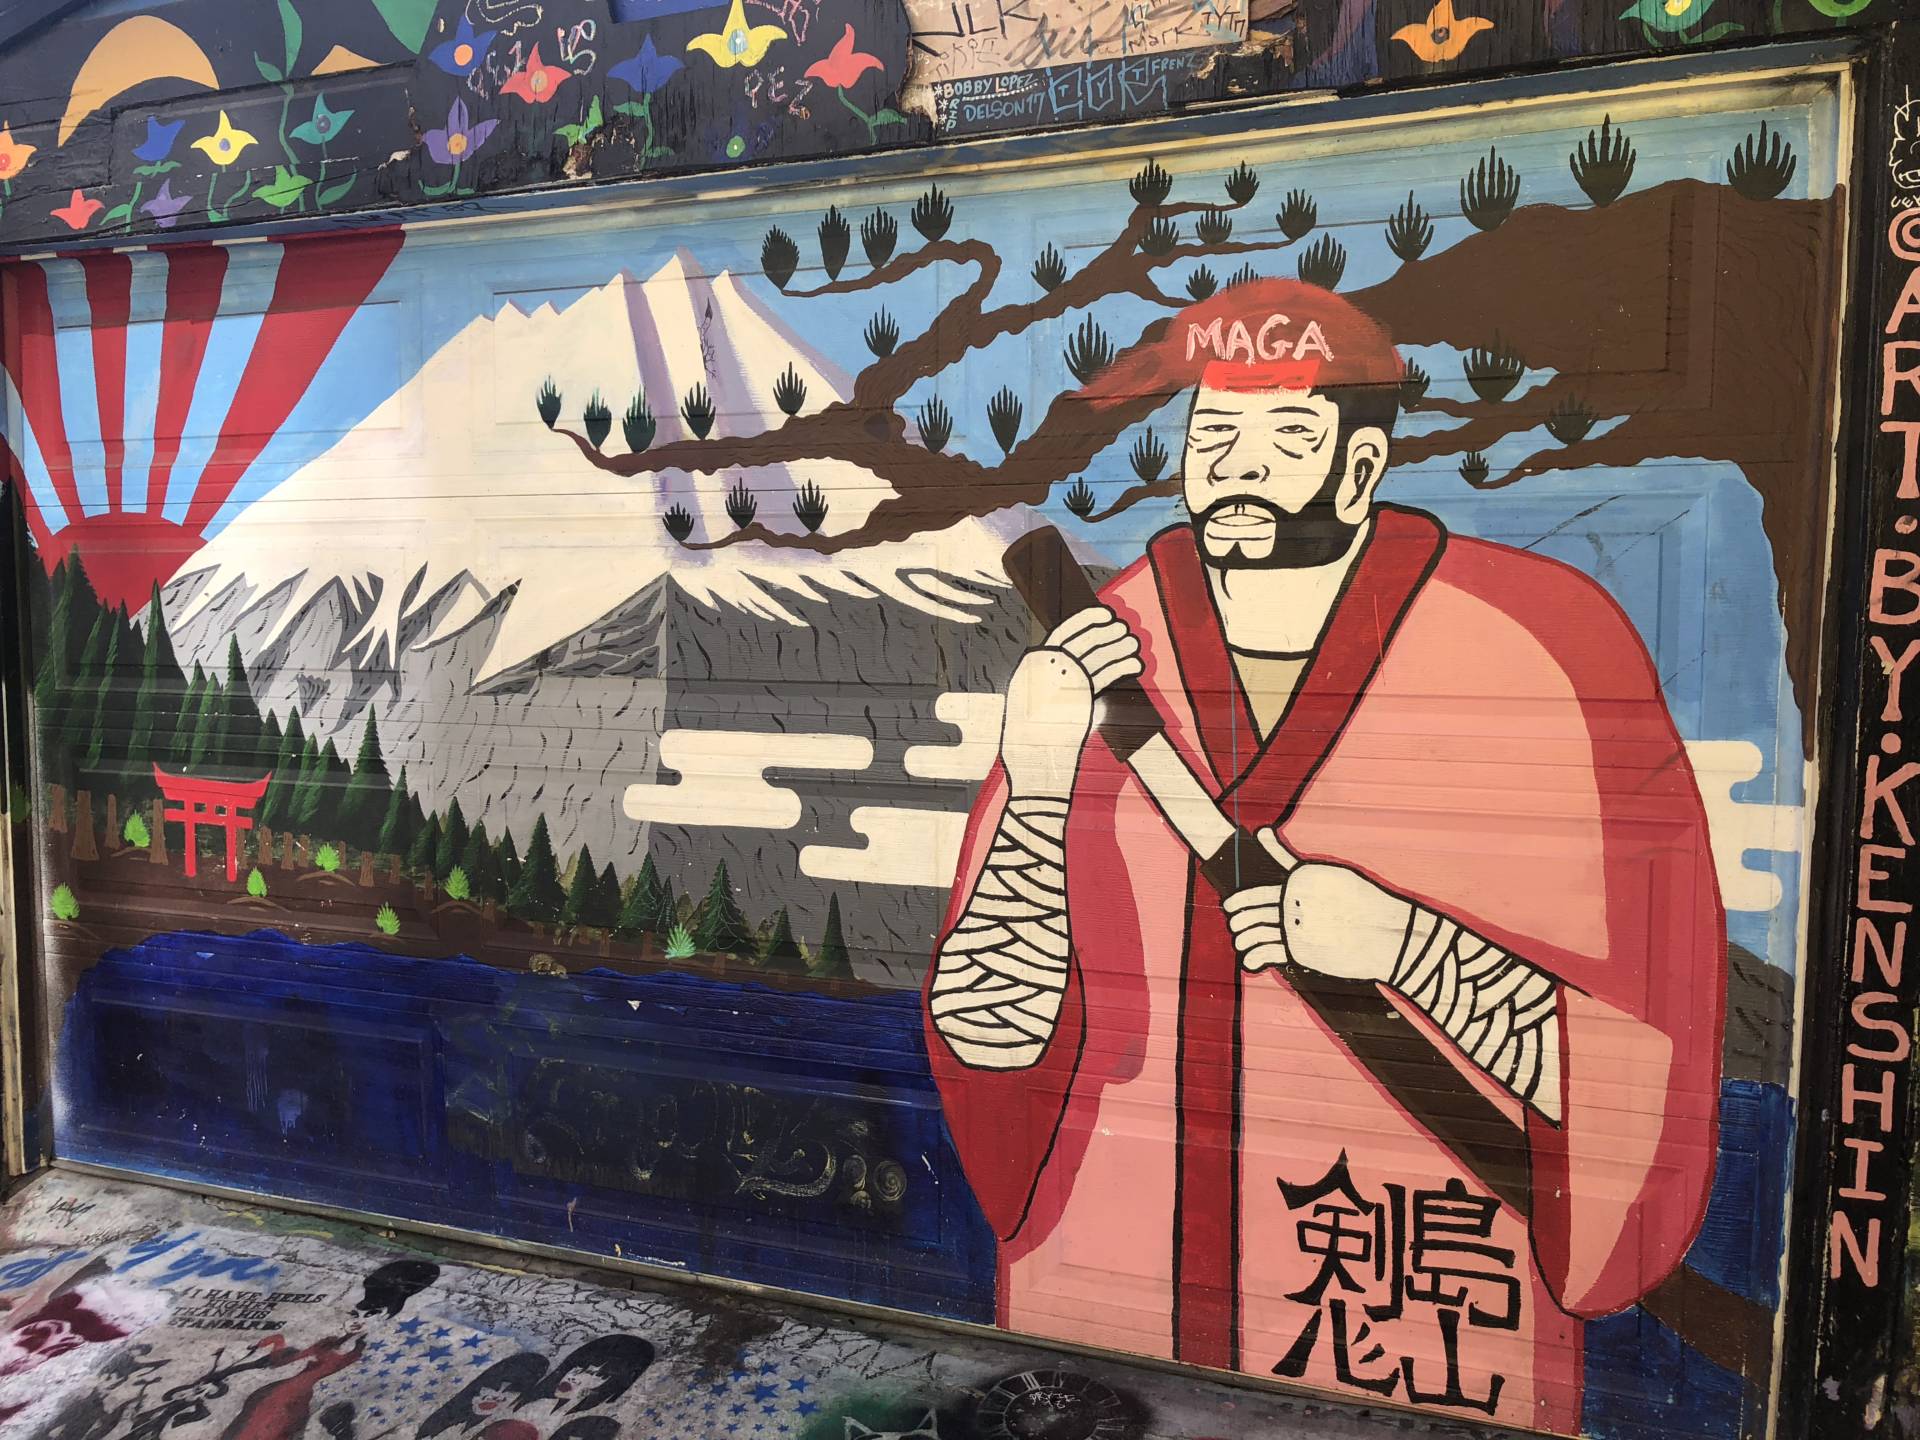 Several murals were vandalized with "Make America Great Again" imagery. Tiffany Camhi/KQED